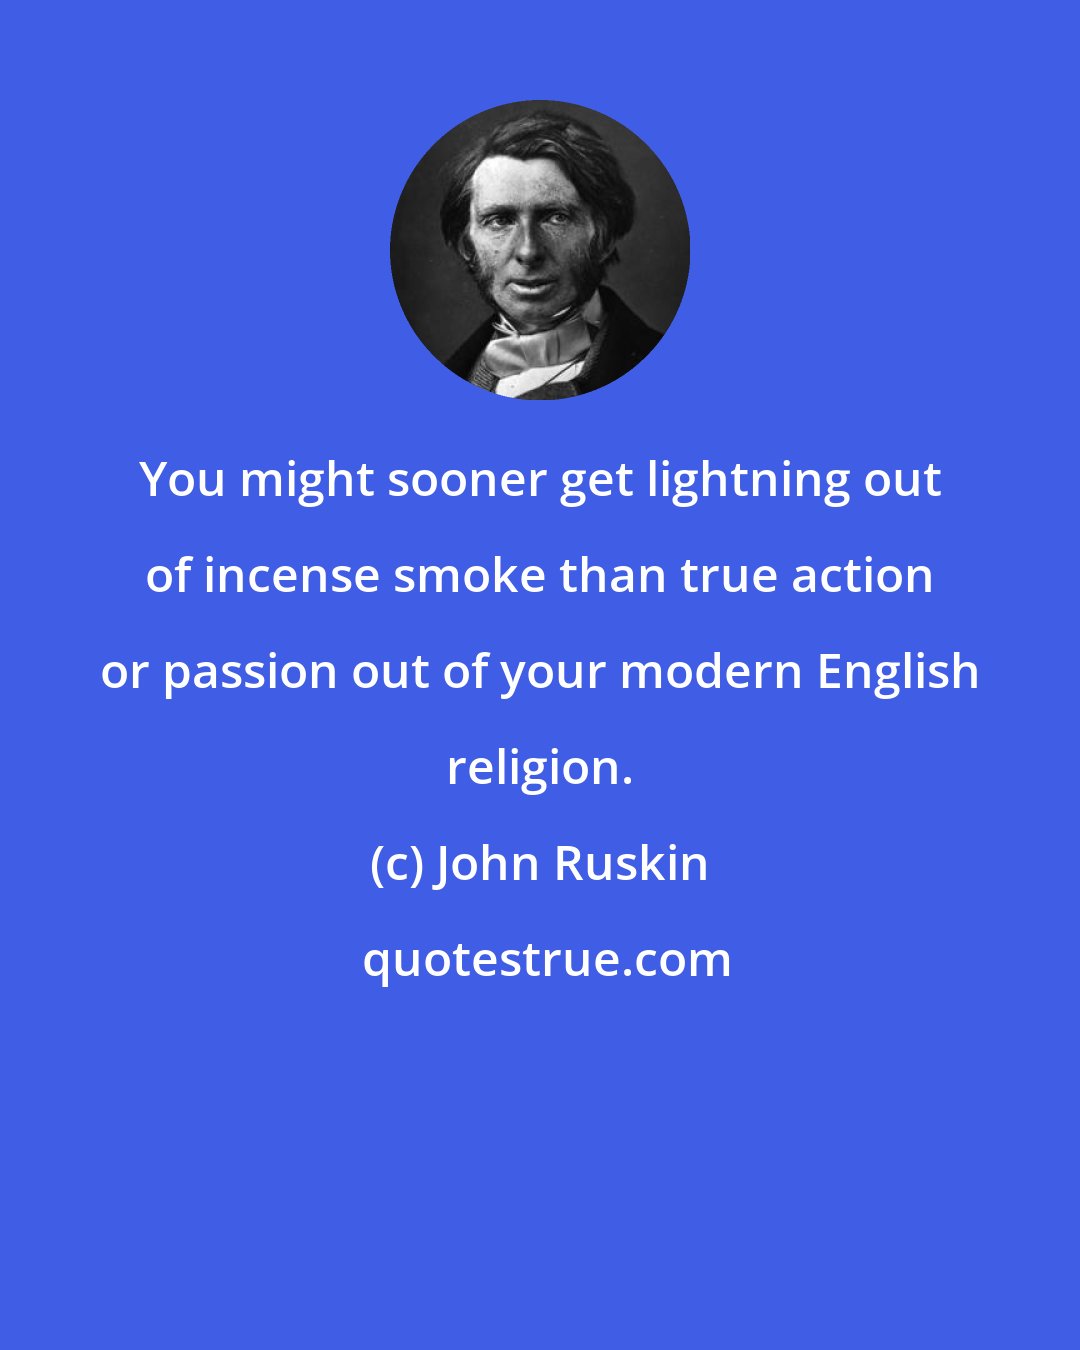 John Ruskin: You might sooner get lightning out of incense smoke than true action or passion out of your modern English religion.